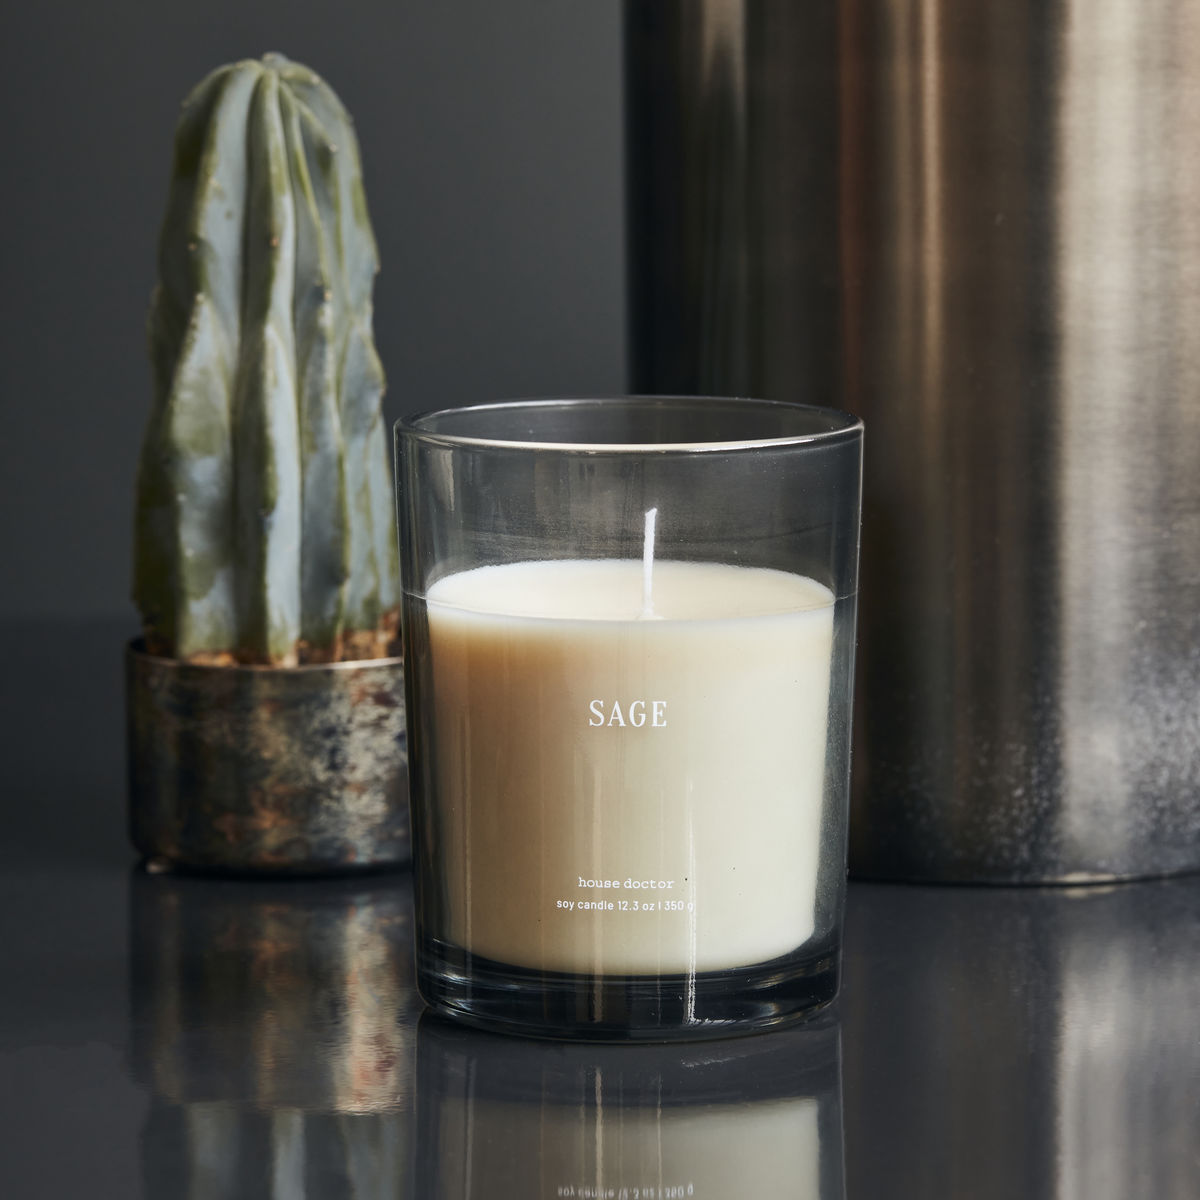 Scented candle, Sage, Blue Café Society